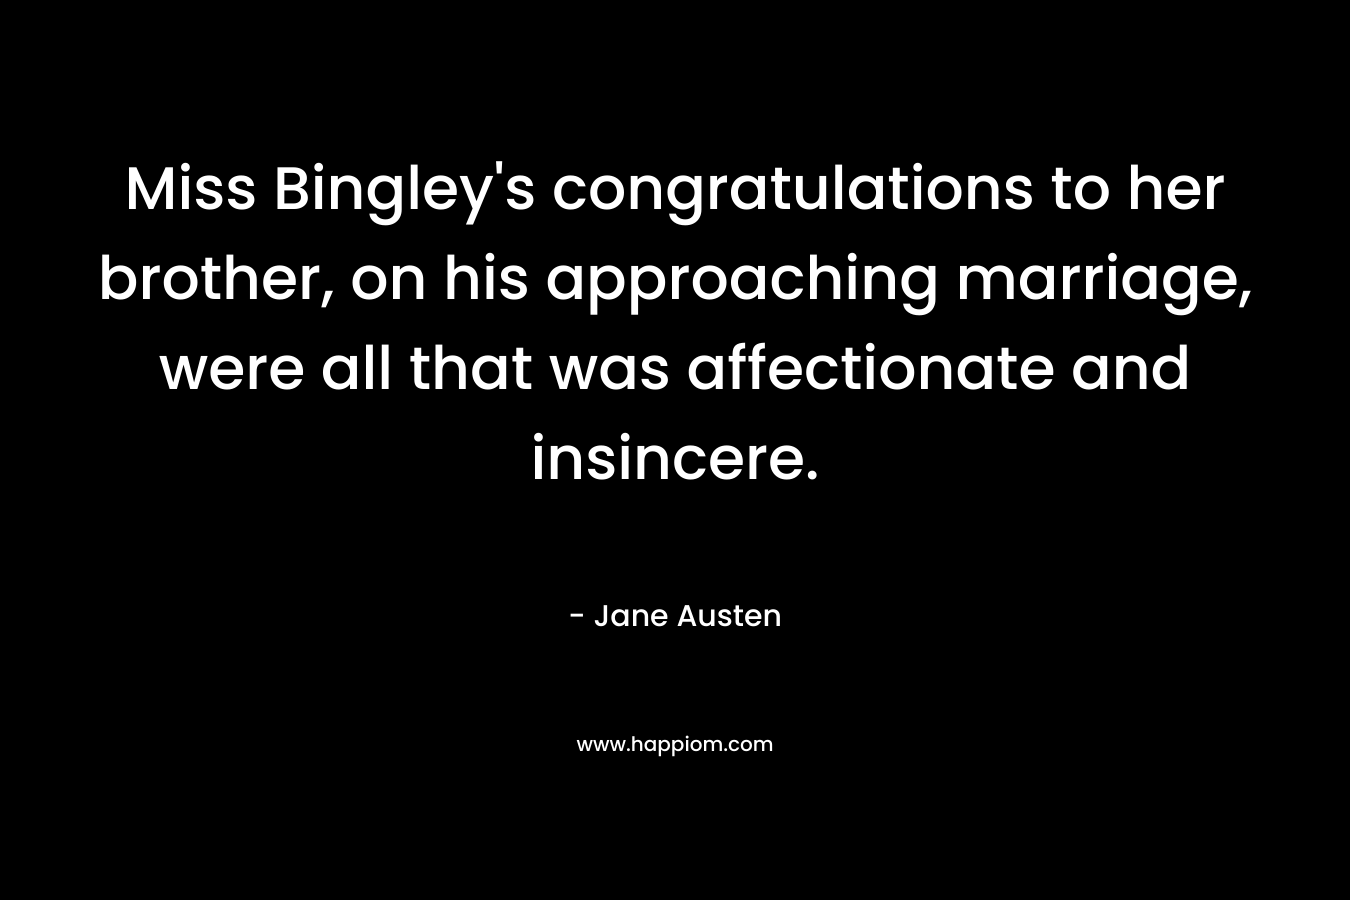 Miss Bingley’s congratulations to her brother, on his approaching marriage, were all that was affectionate and insincere. – Jane Austen